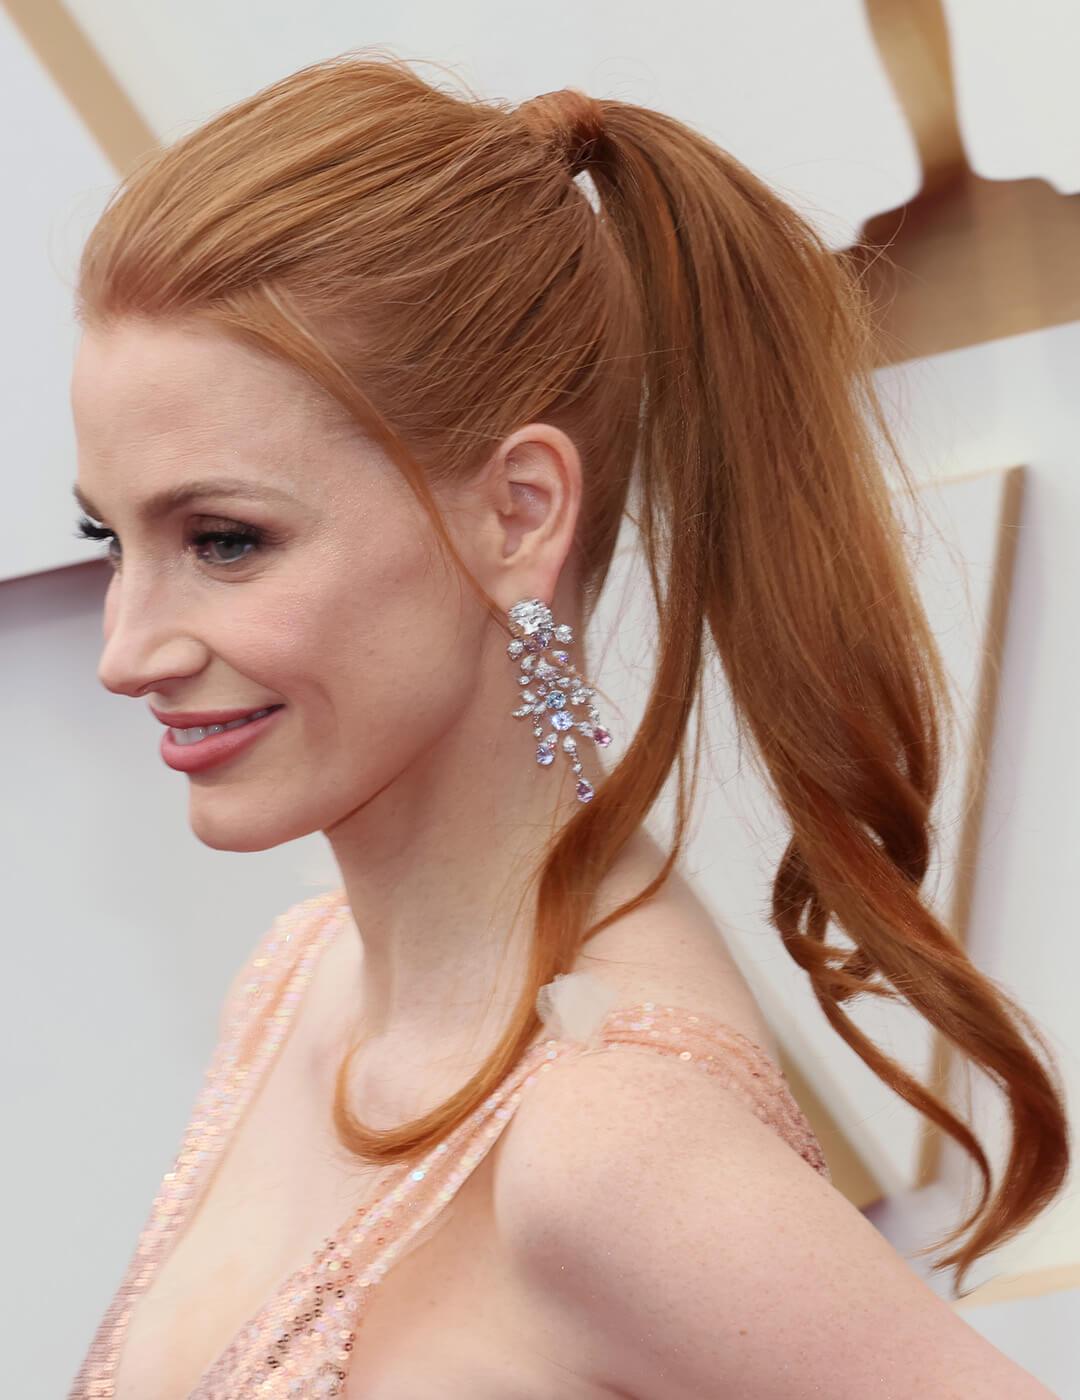 Jessica Chastain rocking a ponytail hairstyle, stone-studded dangling earrings and pink sequined dress